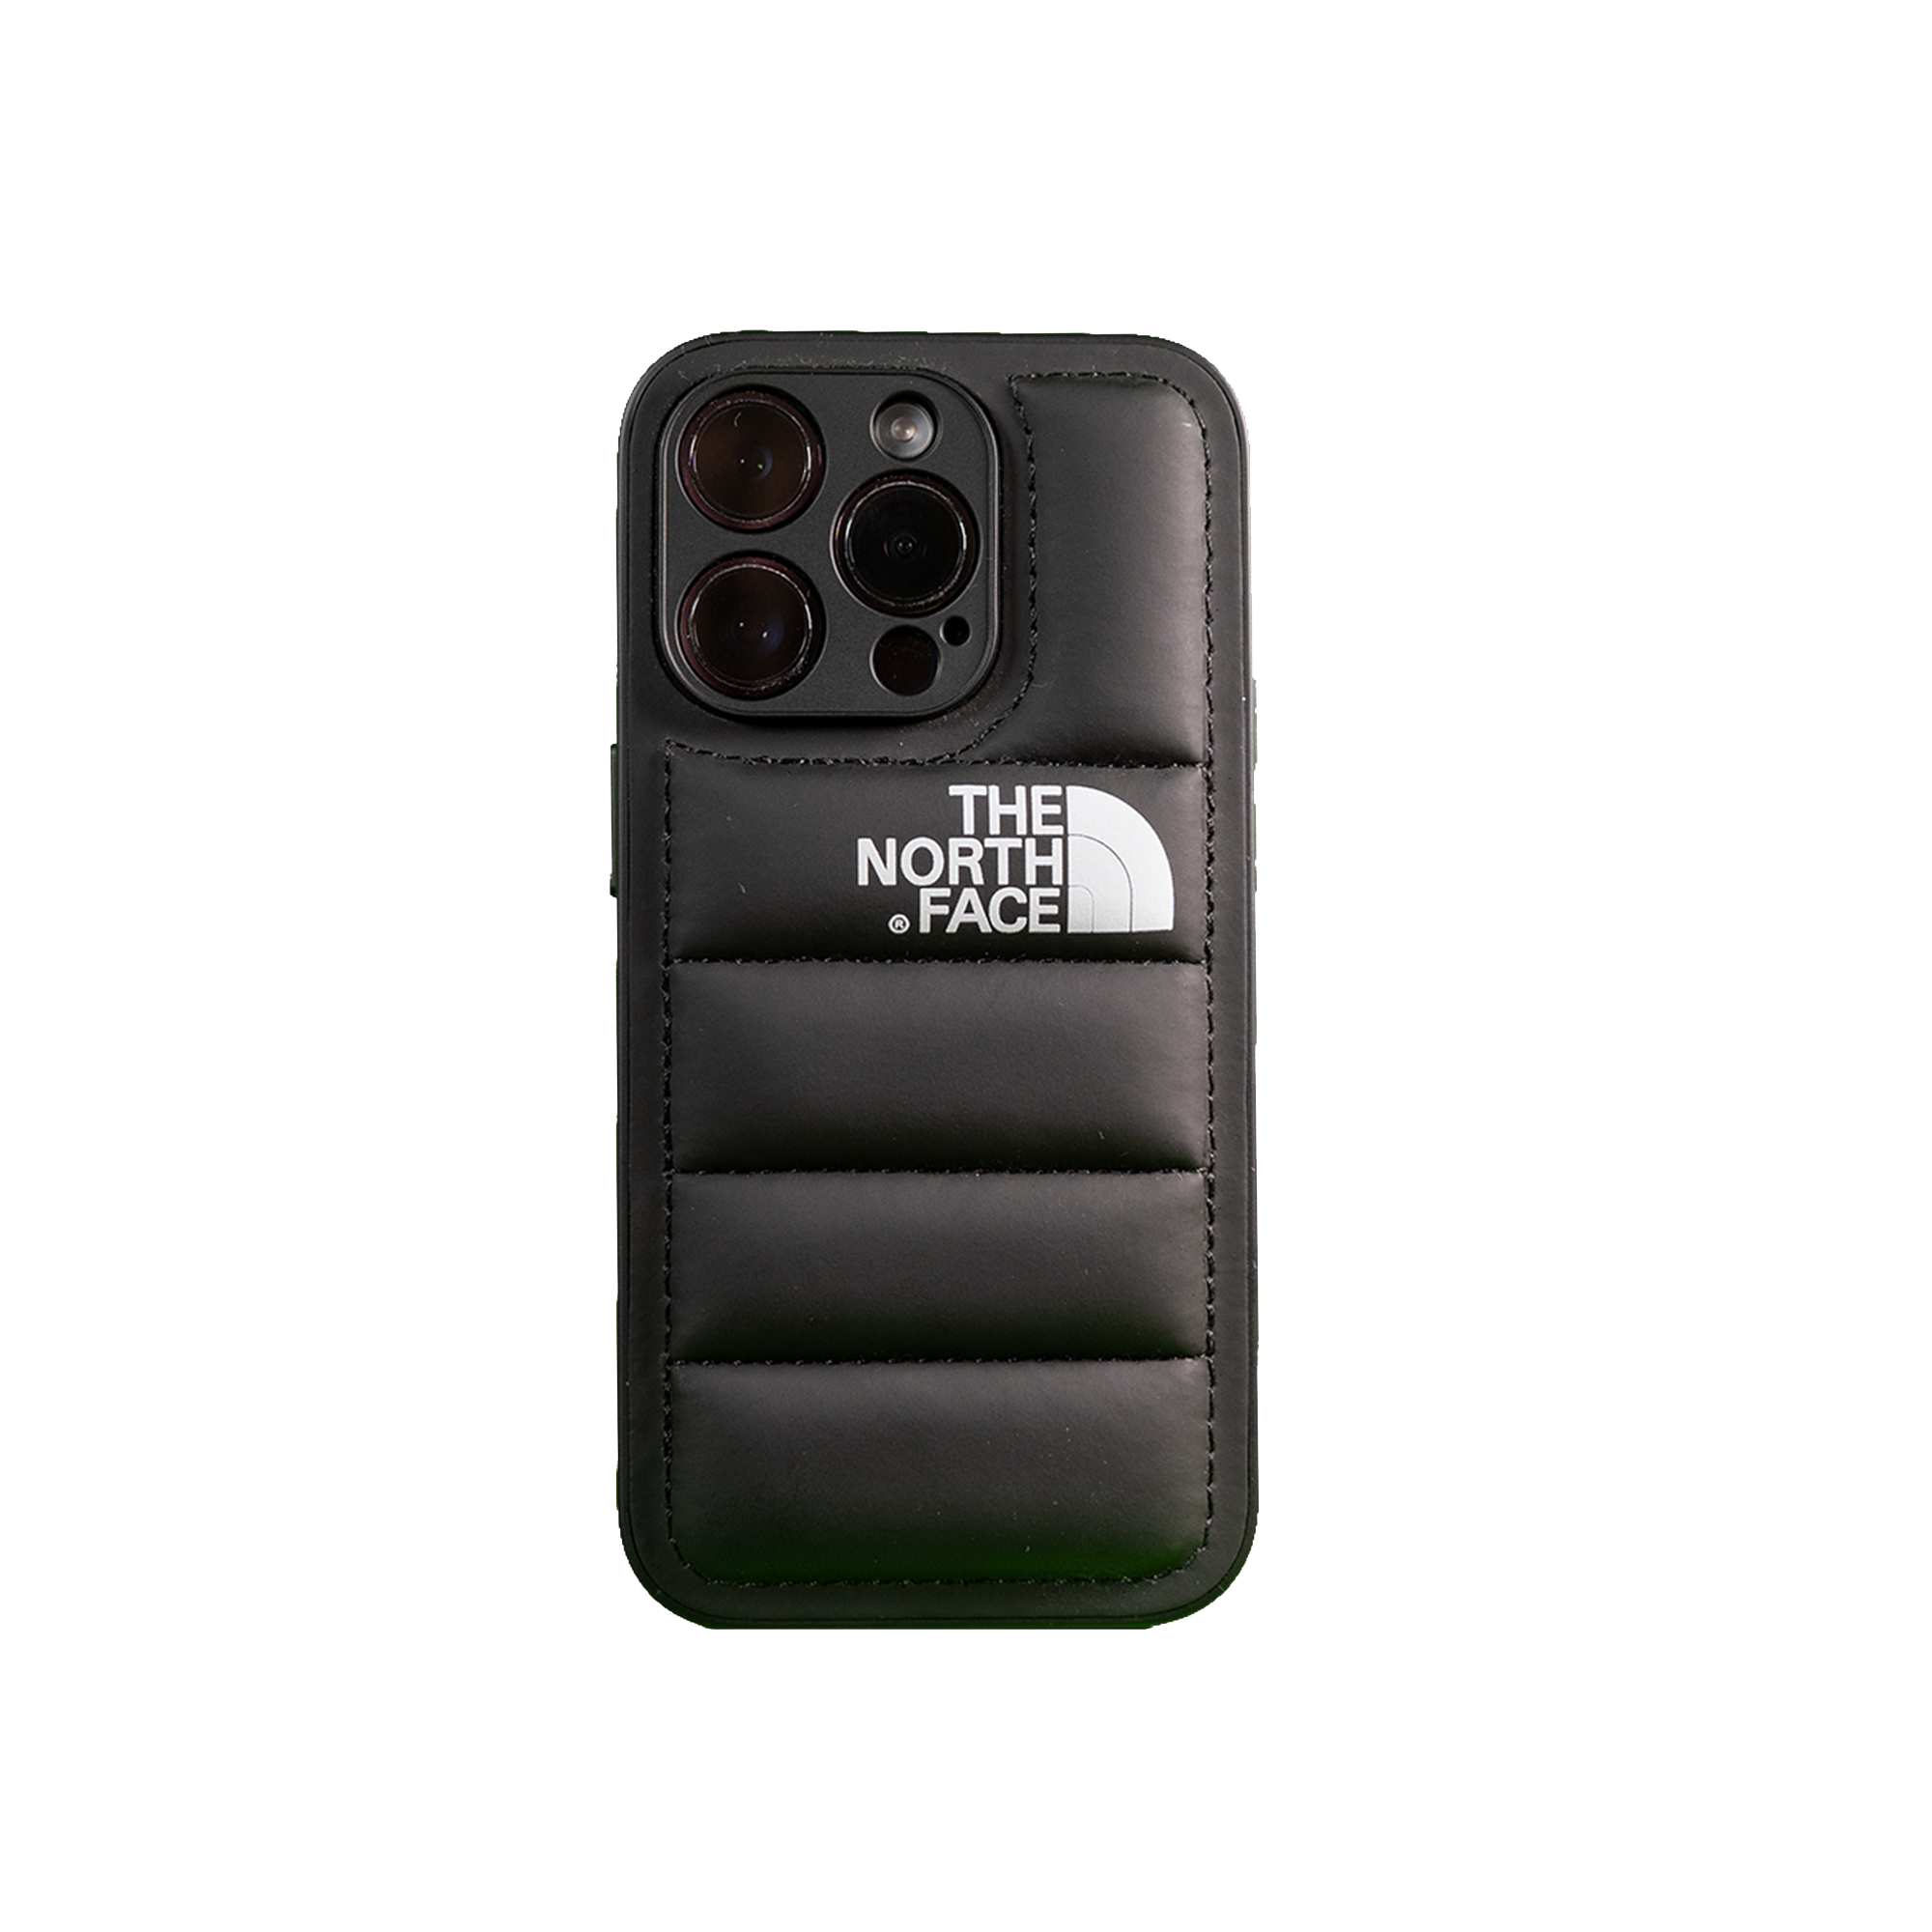 The North Face's sophisticated black phone case, ideal for the urban explorer.